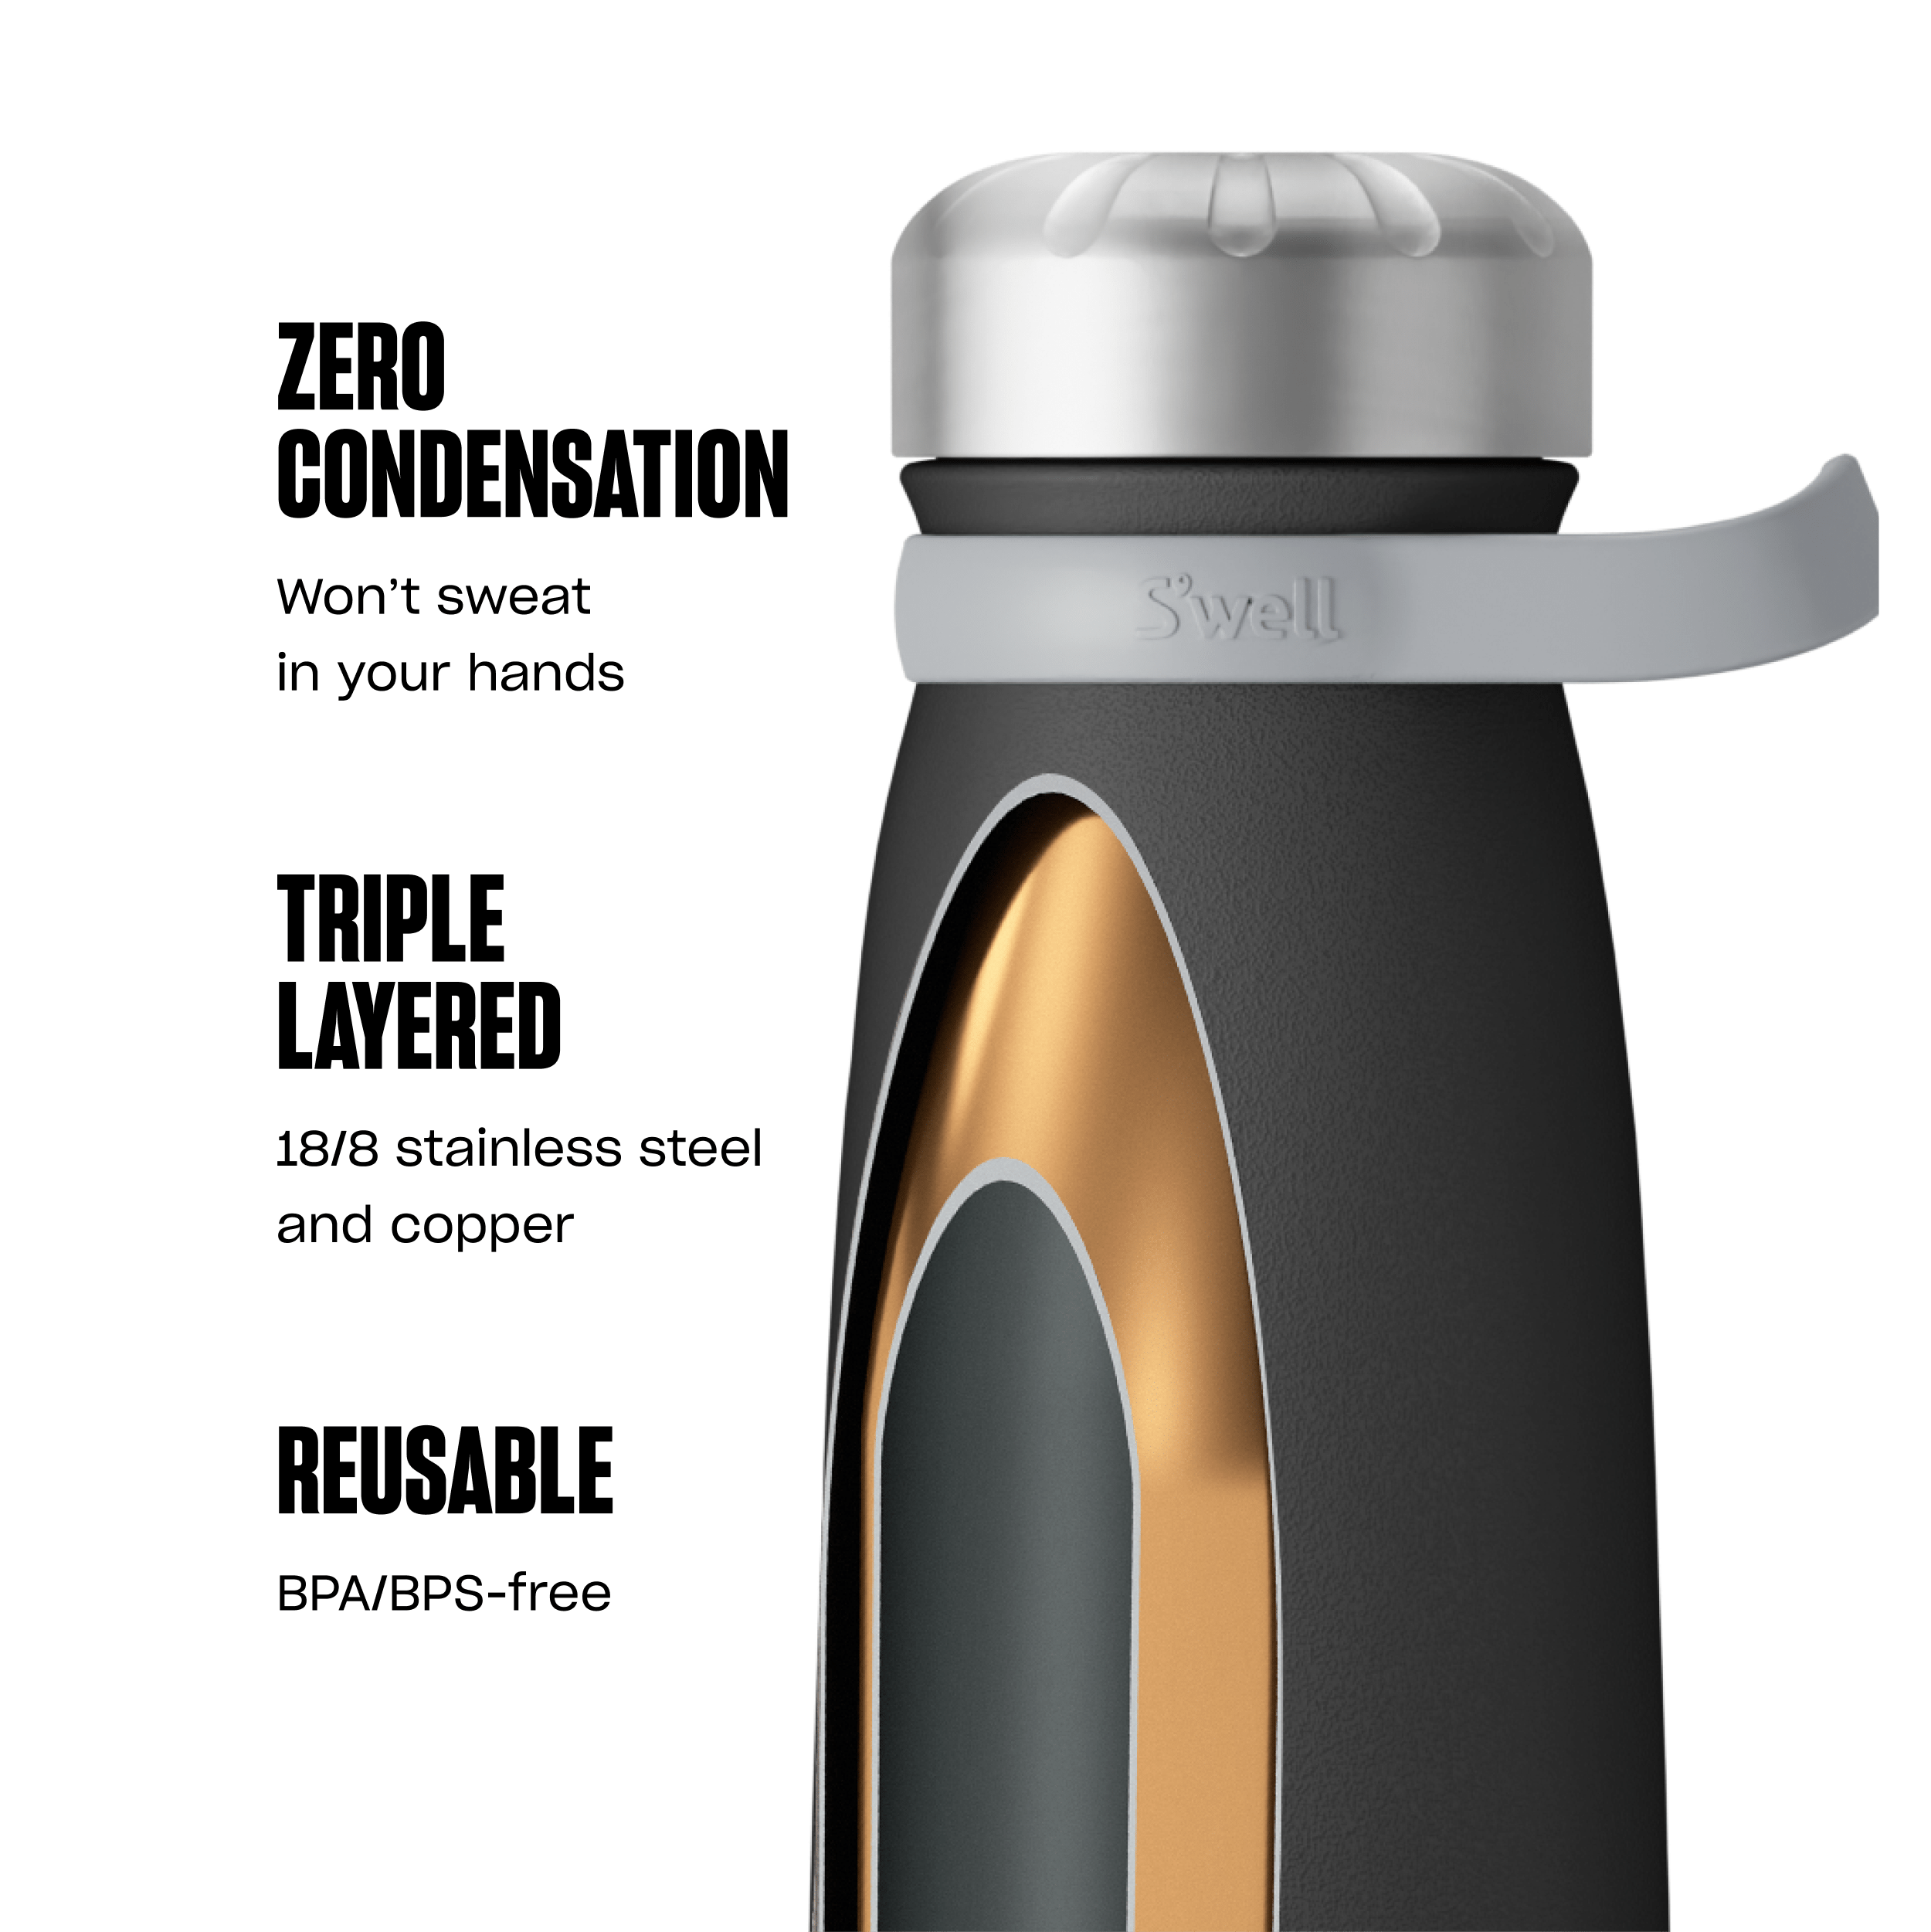 S'well® Roamer Insulated Water Bottle - 40 oz – To The Nines